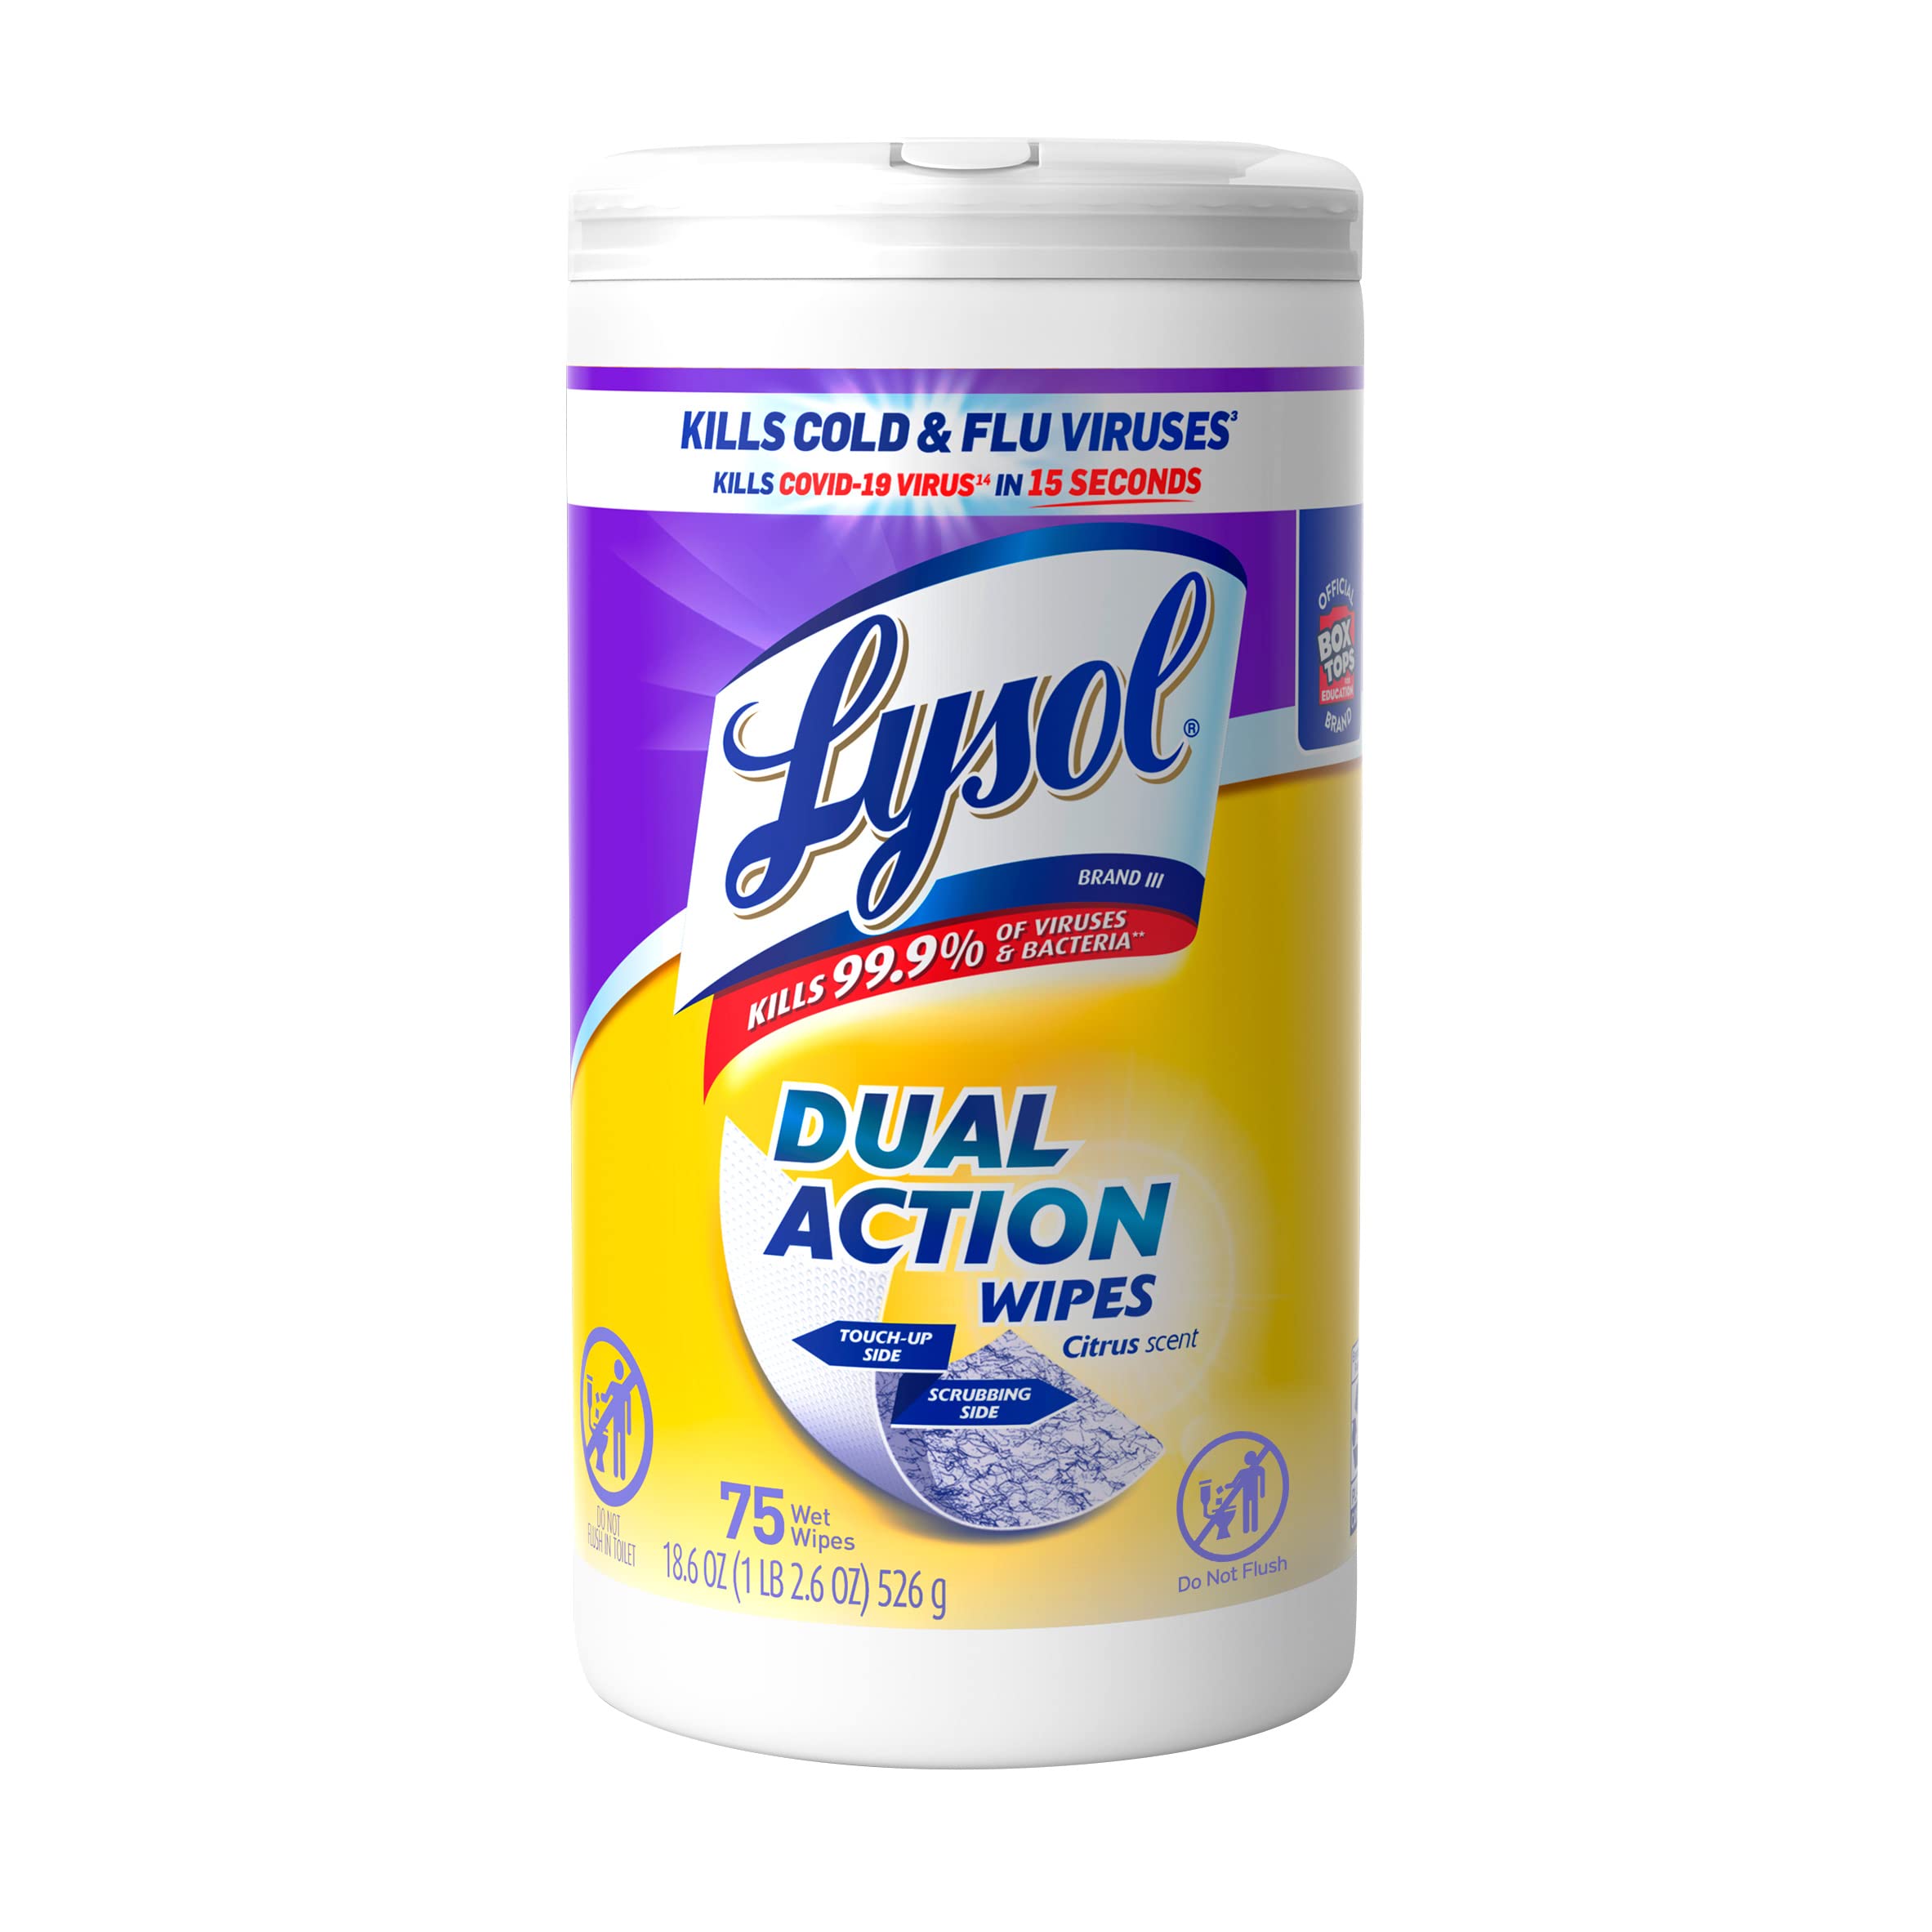 Lysol Dual Action Disinfectant Wipes, Multi-Surface Antibacterial Scrubbing Wipes, For Disinfecting and Cleaning, Citrus Scent, 75ct